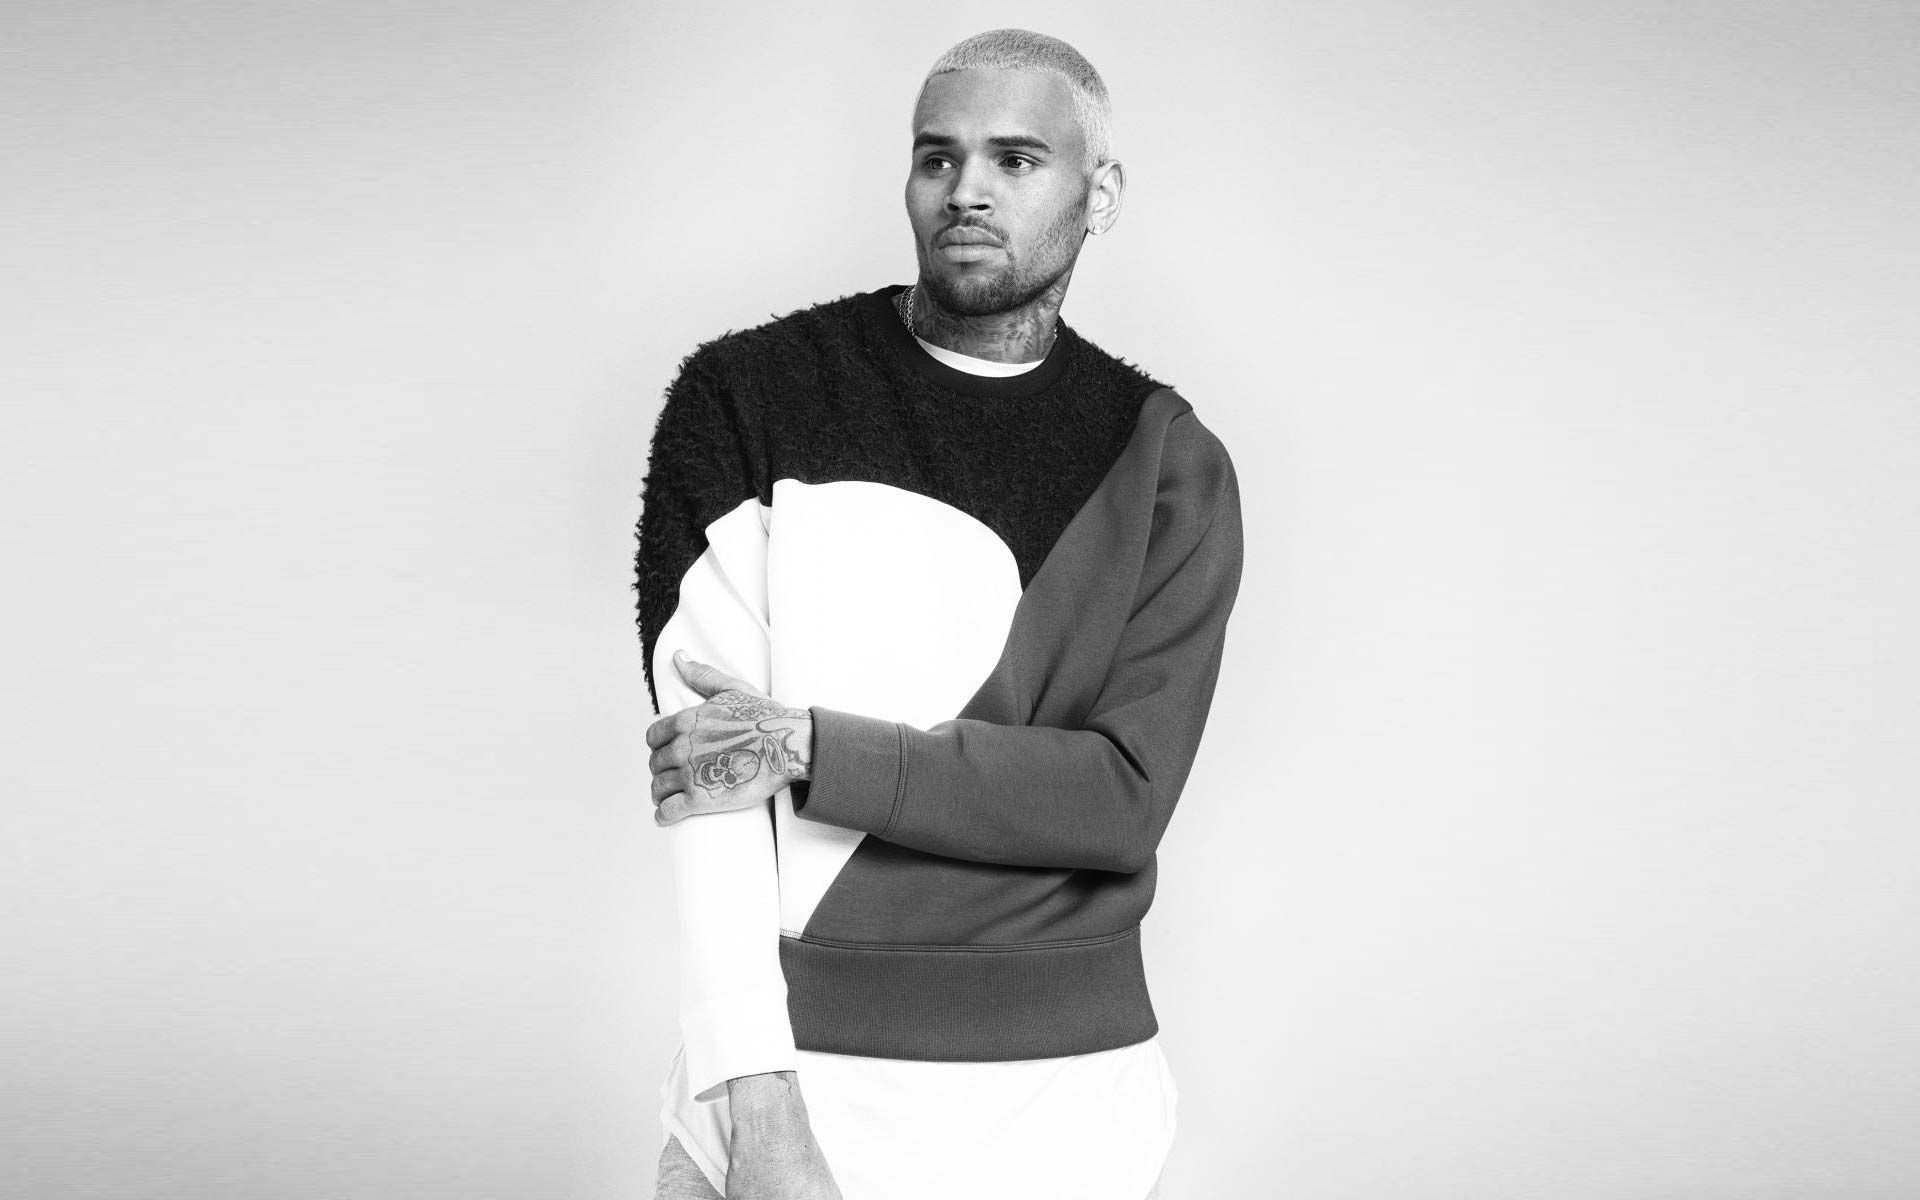 Chris-Brown-Black-and-White-Wallpapers.jpg